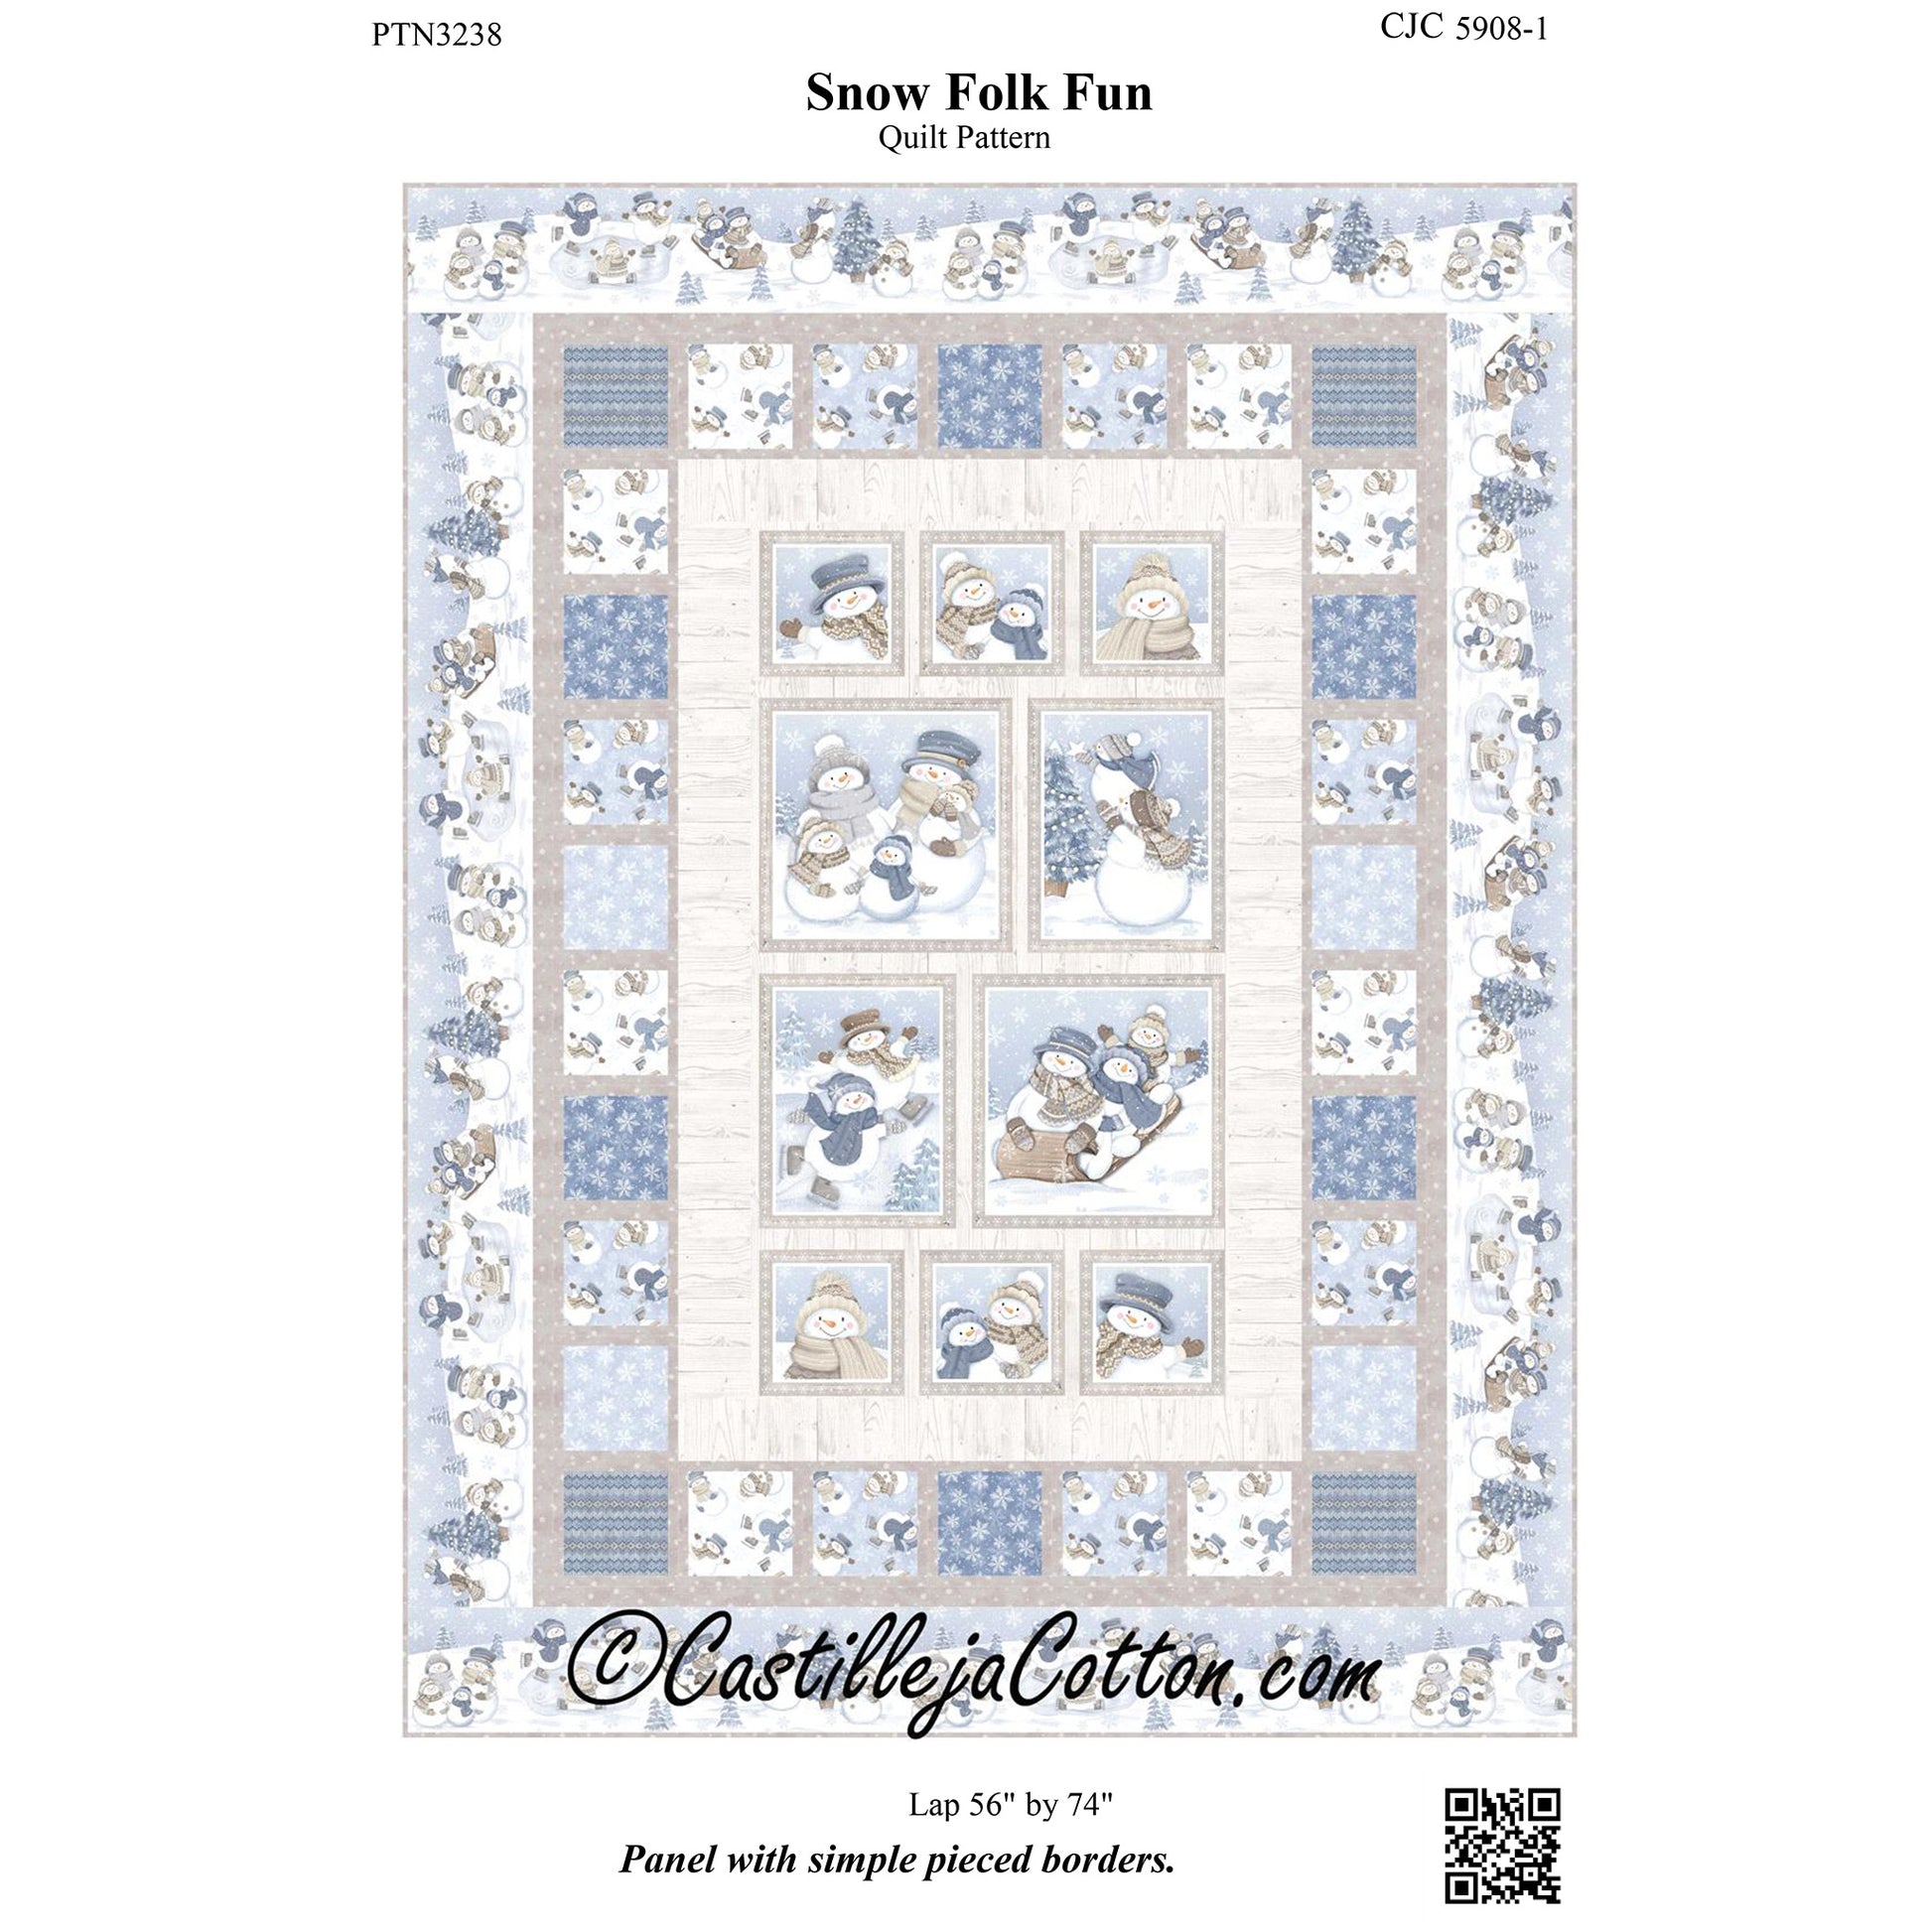 Cover image of pattern for Snow Folk Fun Quilt.